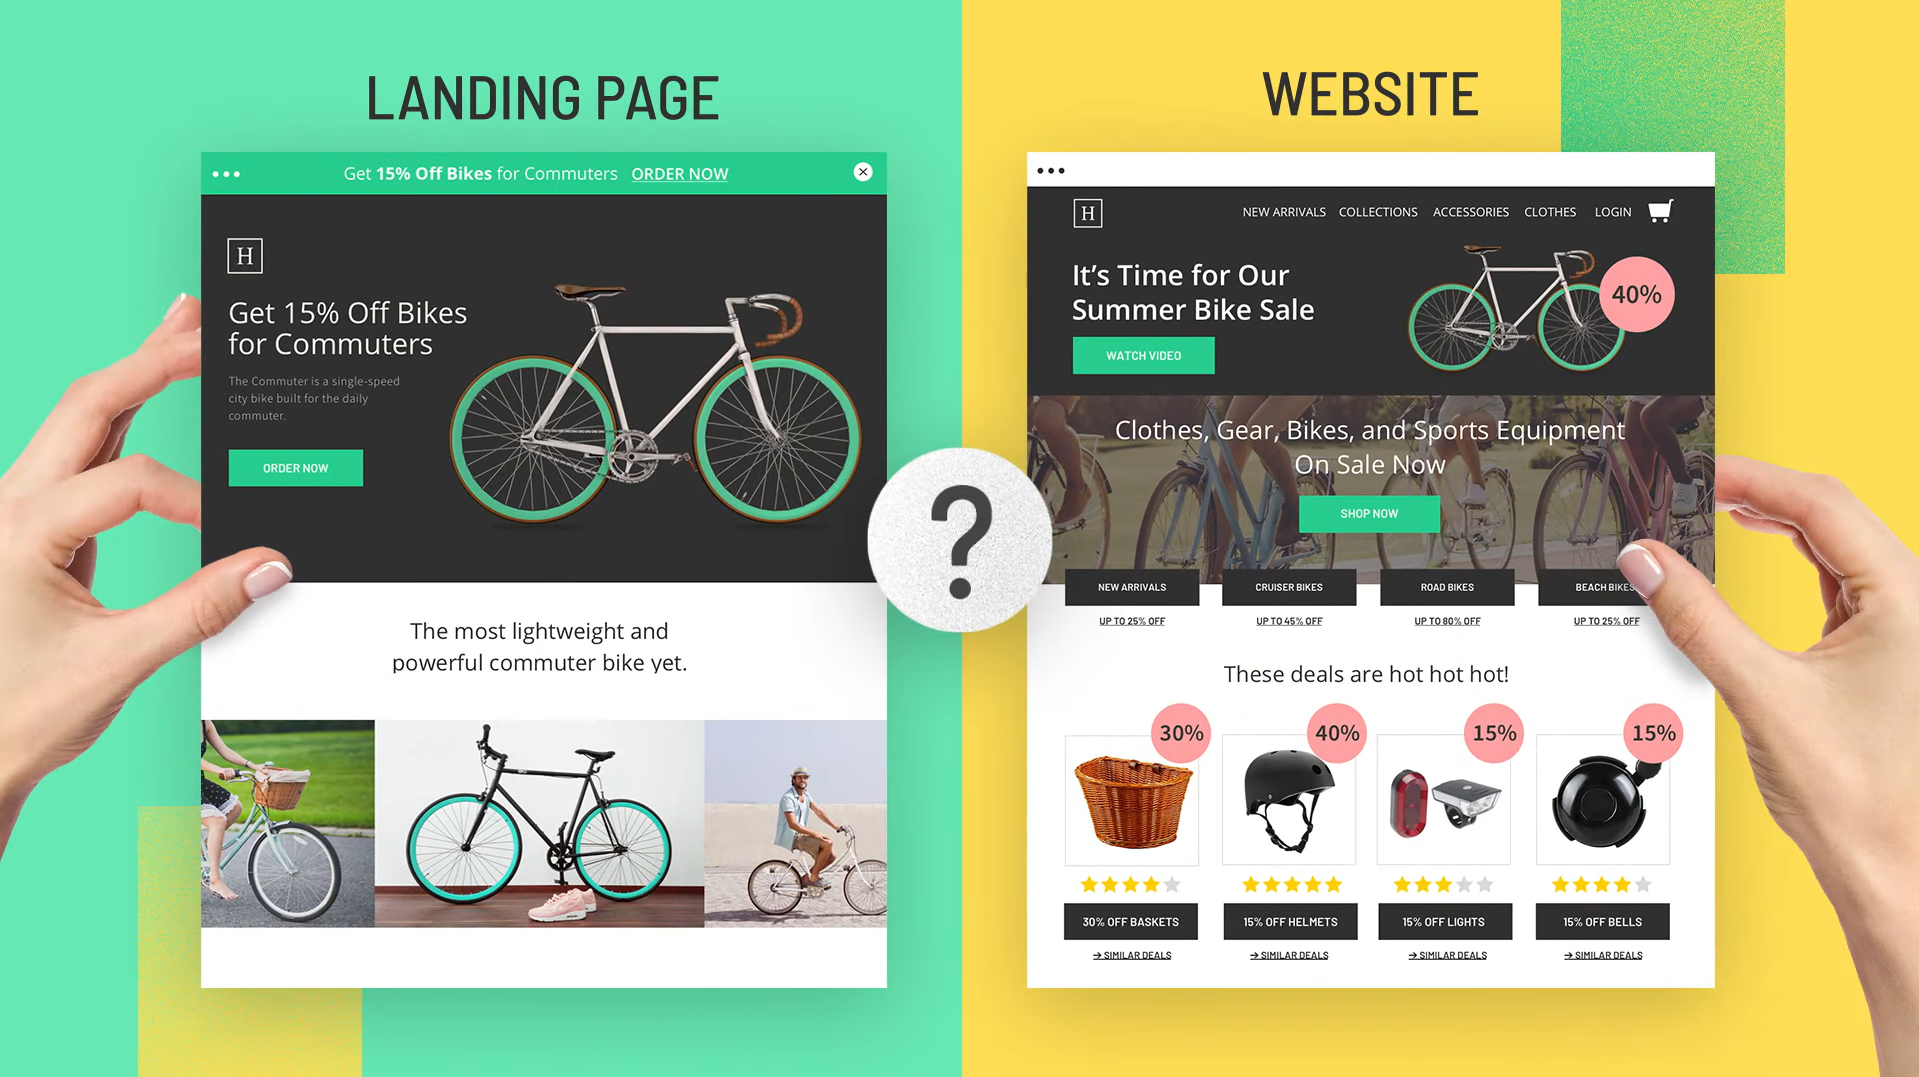 Landing Page Vs Website - Landing Page vs Website: Which to Use When? [8 Key Differences]